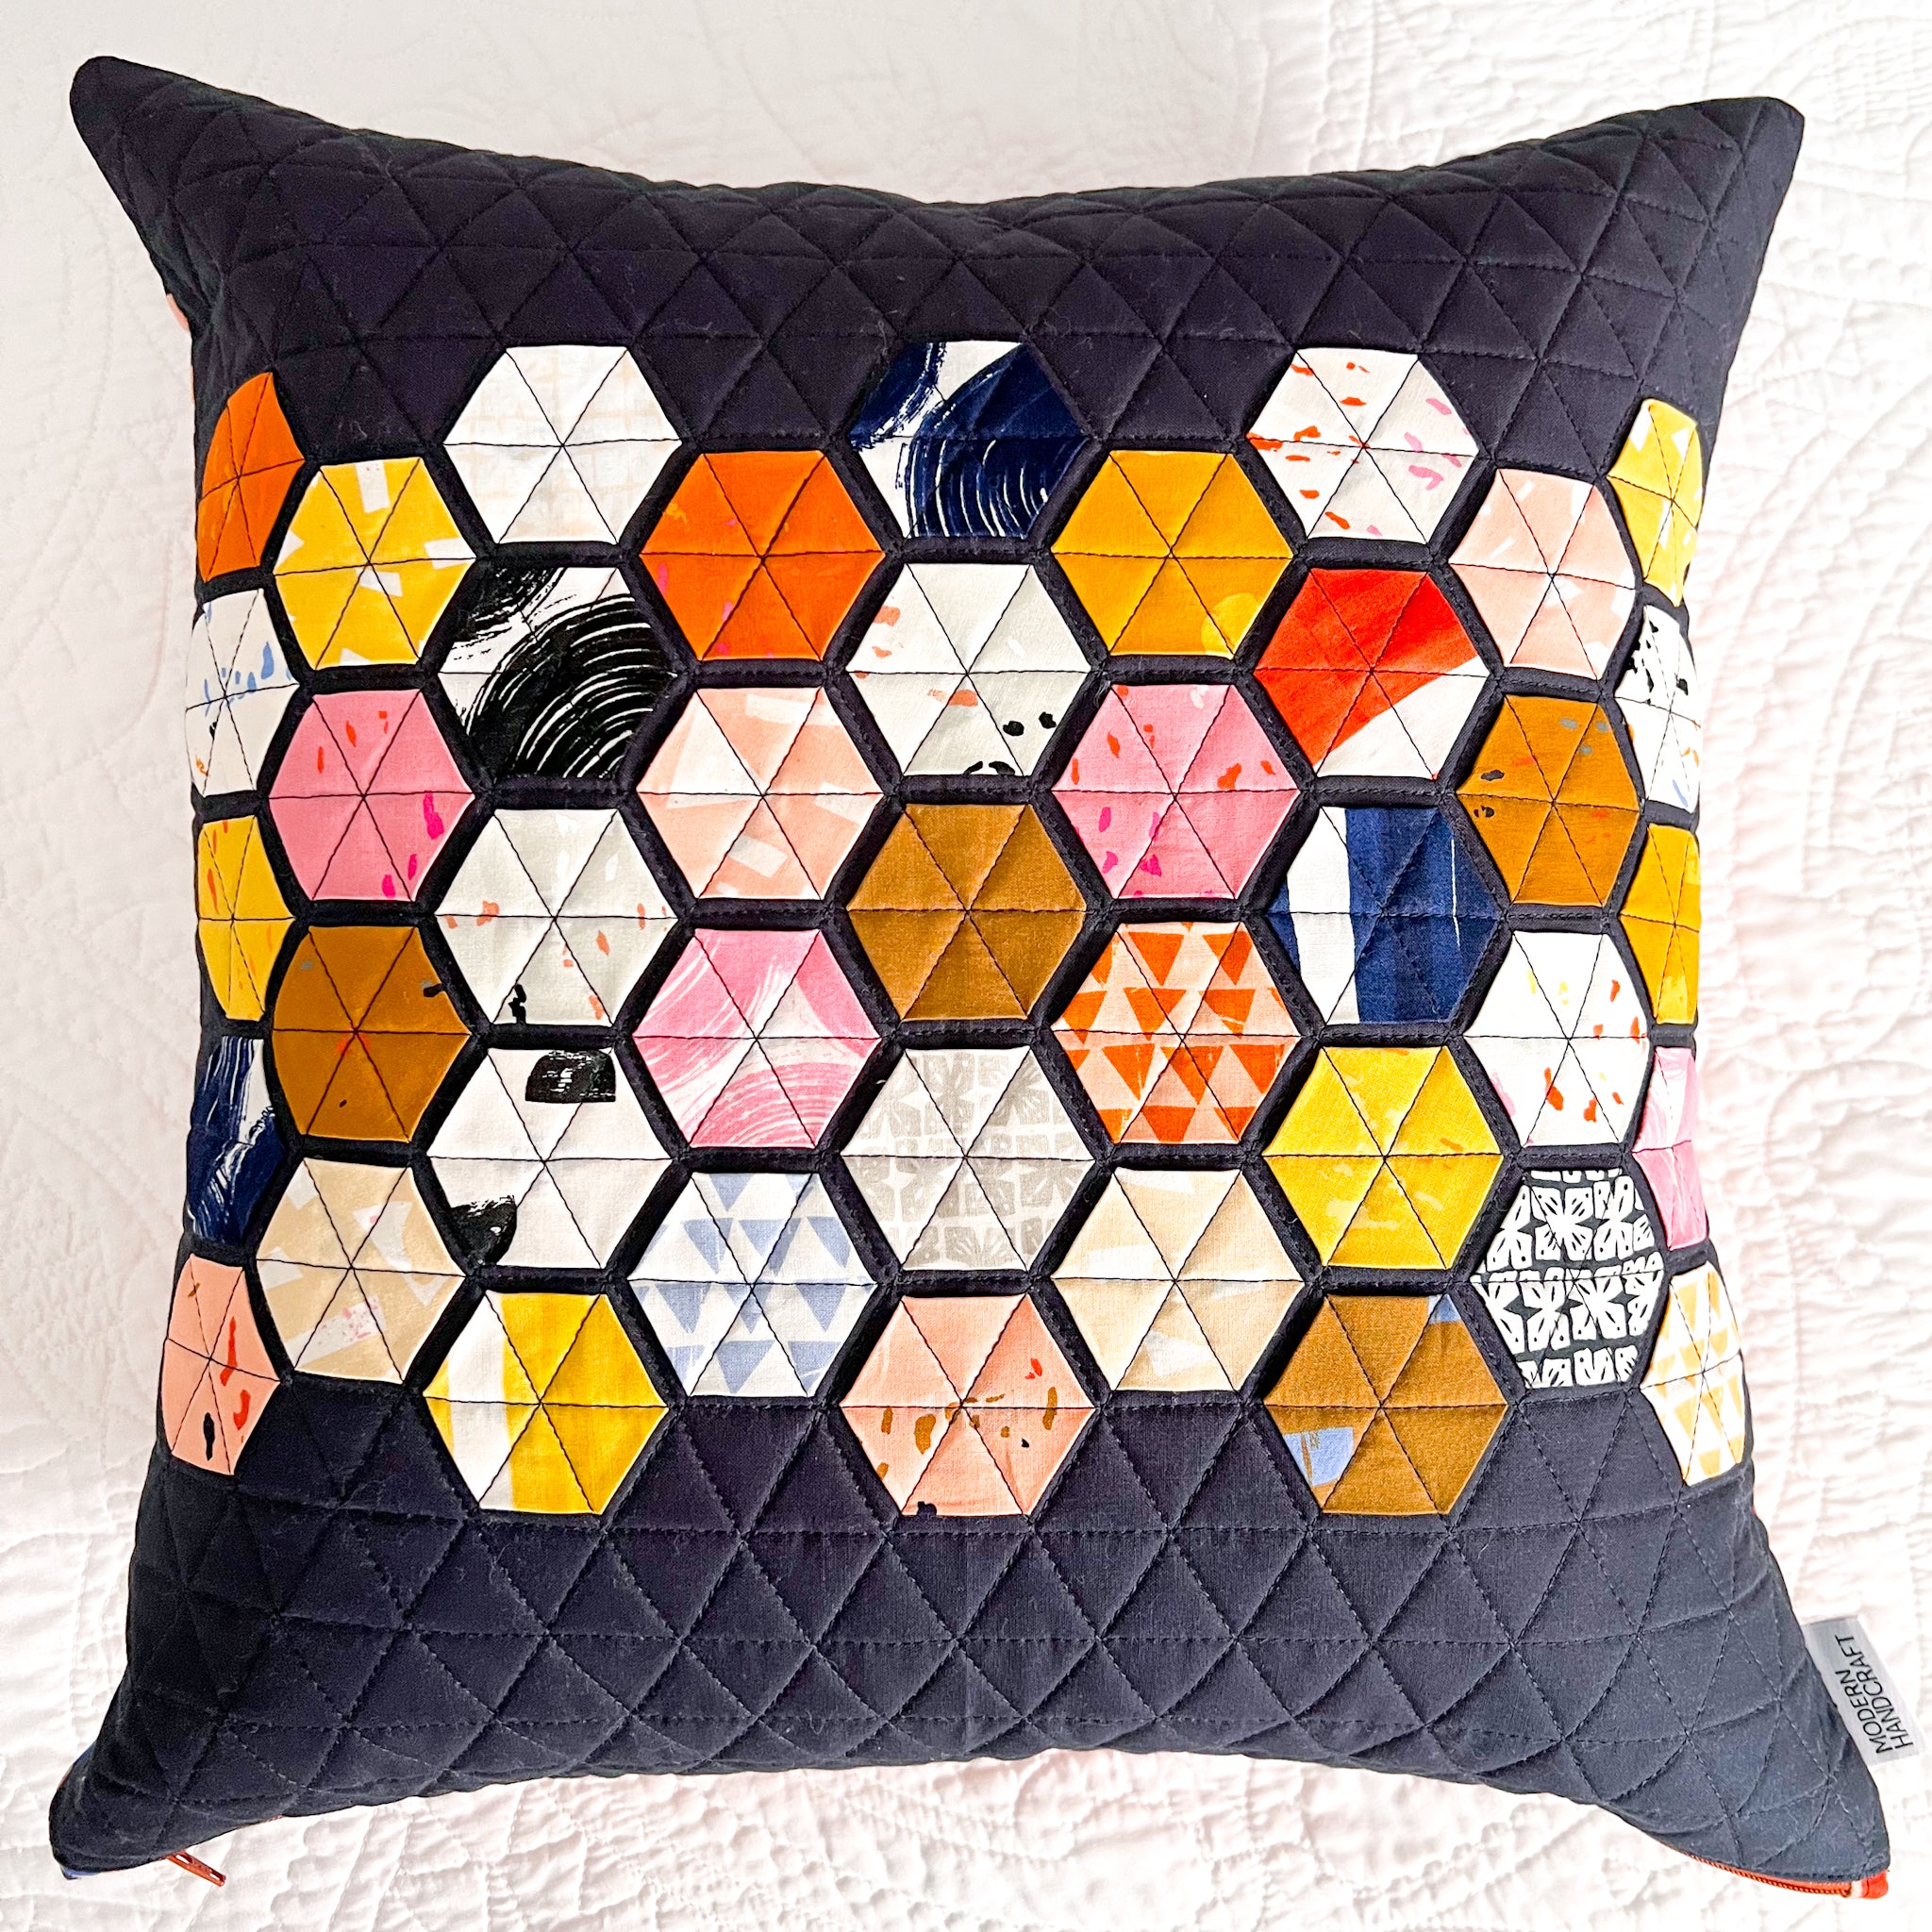 Hexie Pillow Cover - Sketchbook